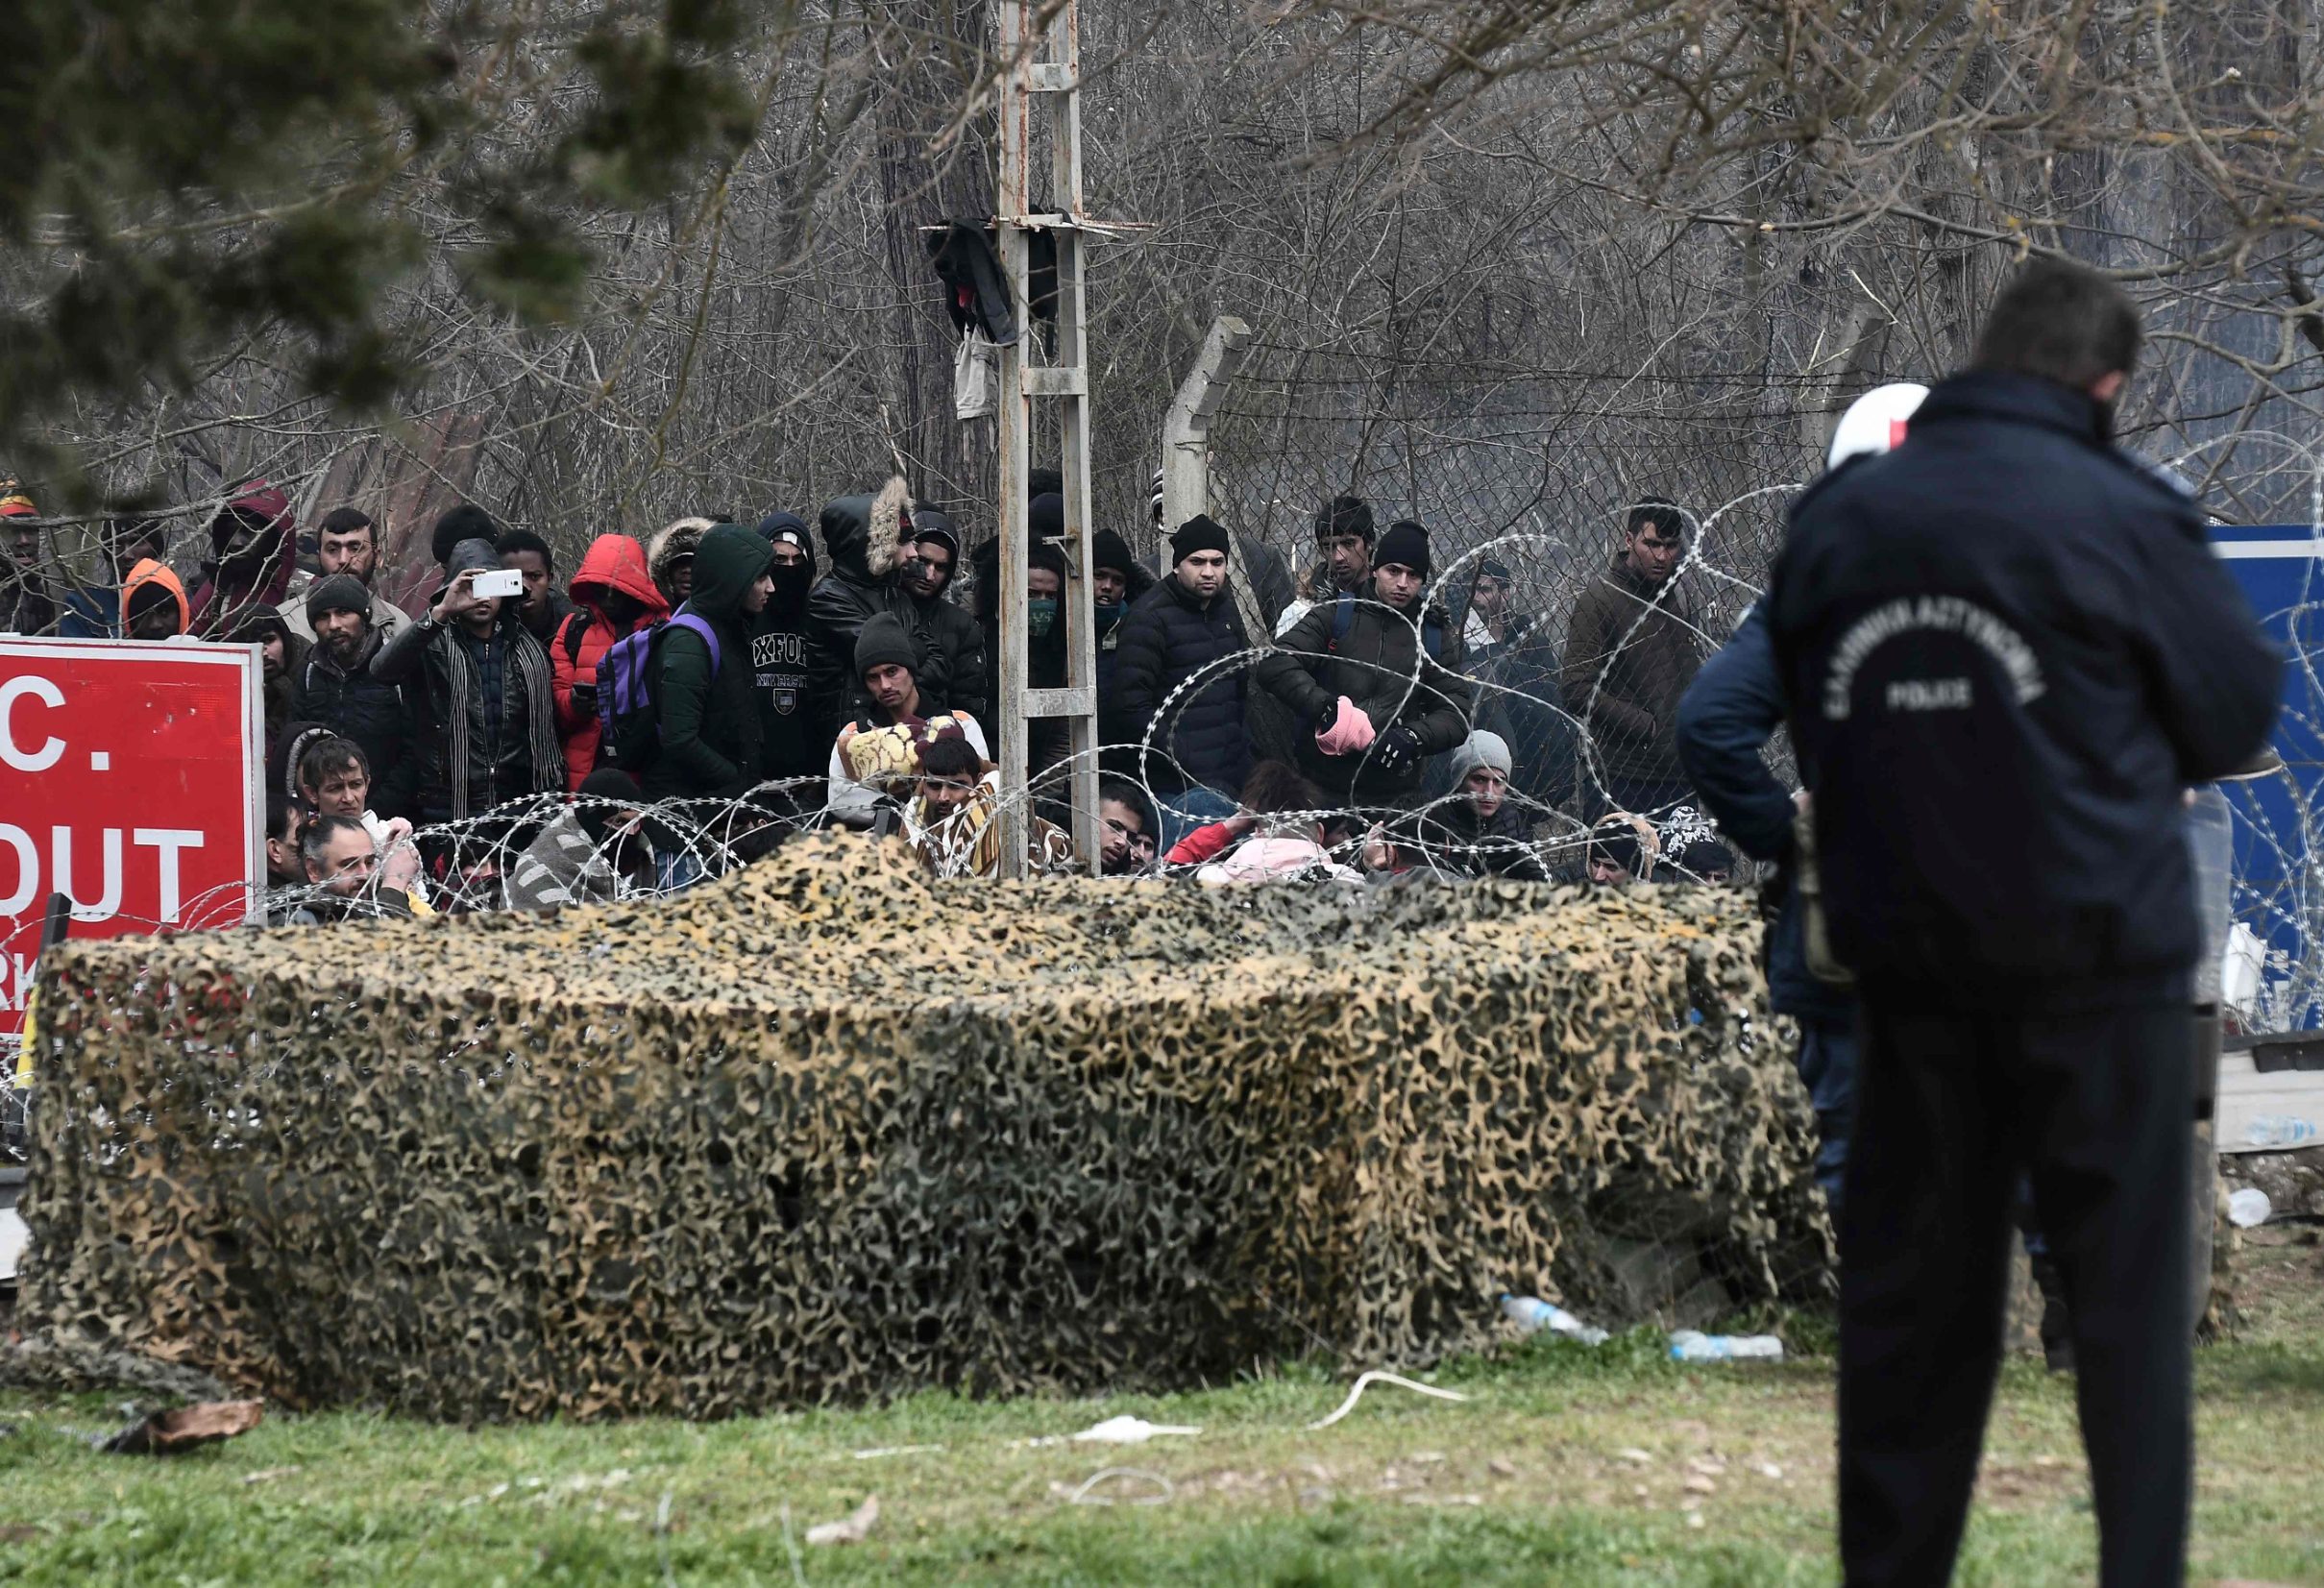 Greek police officers face migrants gathered at the Greece-Turkey border, near Kastanies, Greece, on February 29, 2020. - Thousands of migrants stuck on the Turkey-Greece border clashed with Greek police on February 29, 2020, according to an AFP photographer at the scene. Greek police fired tear gas at migrants who have amassed at a border crossing in the western Turkish province of Edirne, some of whom responded by hurling stones at the officers. The clashes come as Greece bolsters its border after Ankara said it would no longer prevent refugees from crossing into Europe following the death of 33 Turkish troops in northern Syria. (Photo by Sakis MITROLIDIS / AFP)